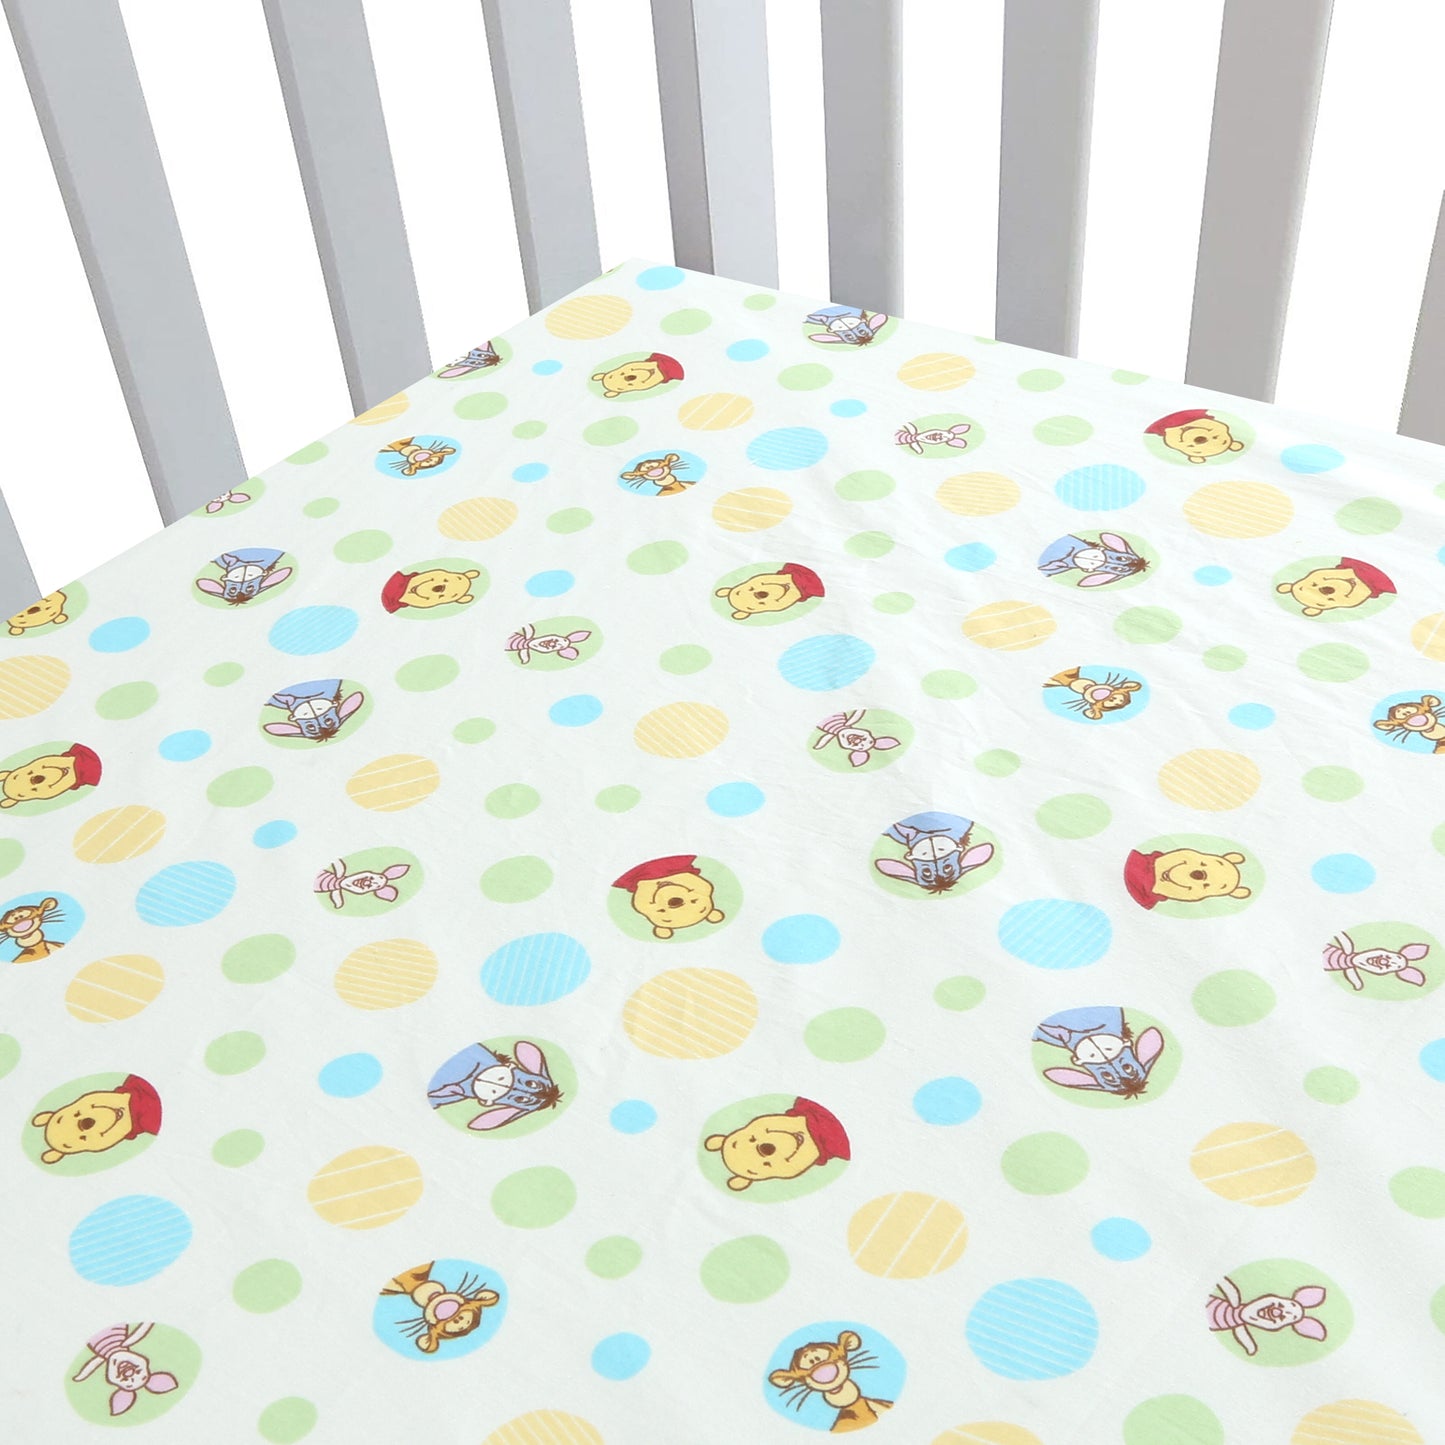 3 Piece Crib/Toddler Cotton Fitted Sheets ColorfulPooh Bear & Farm Animal Friends